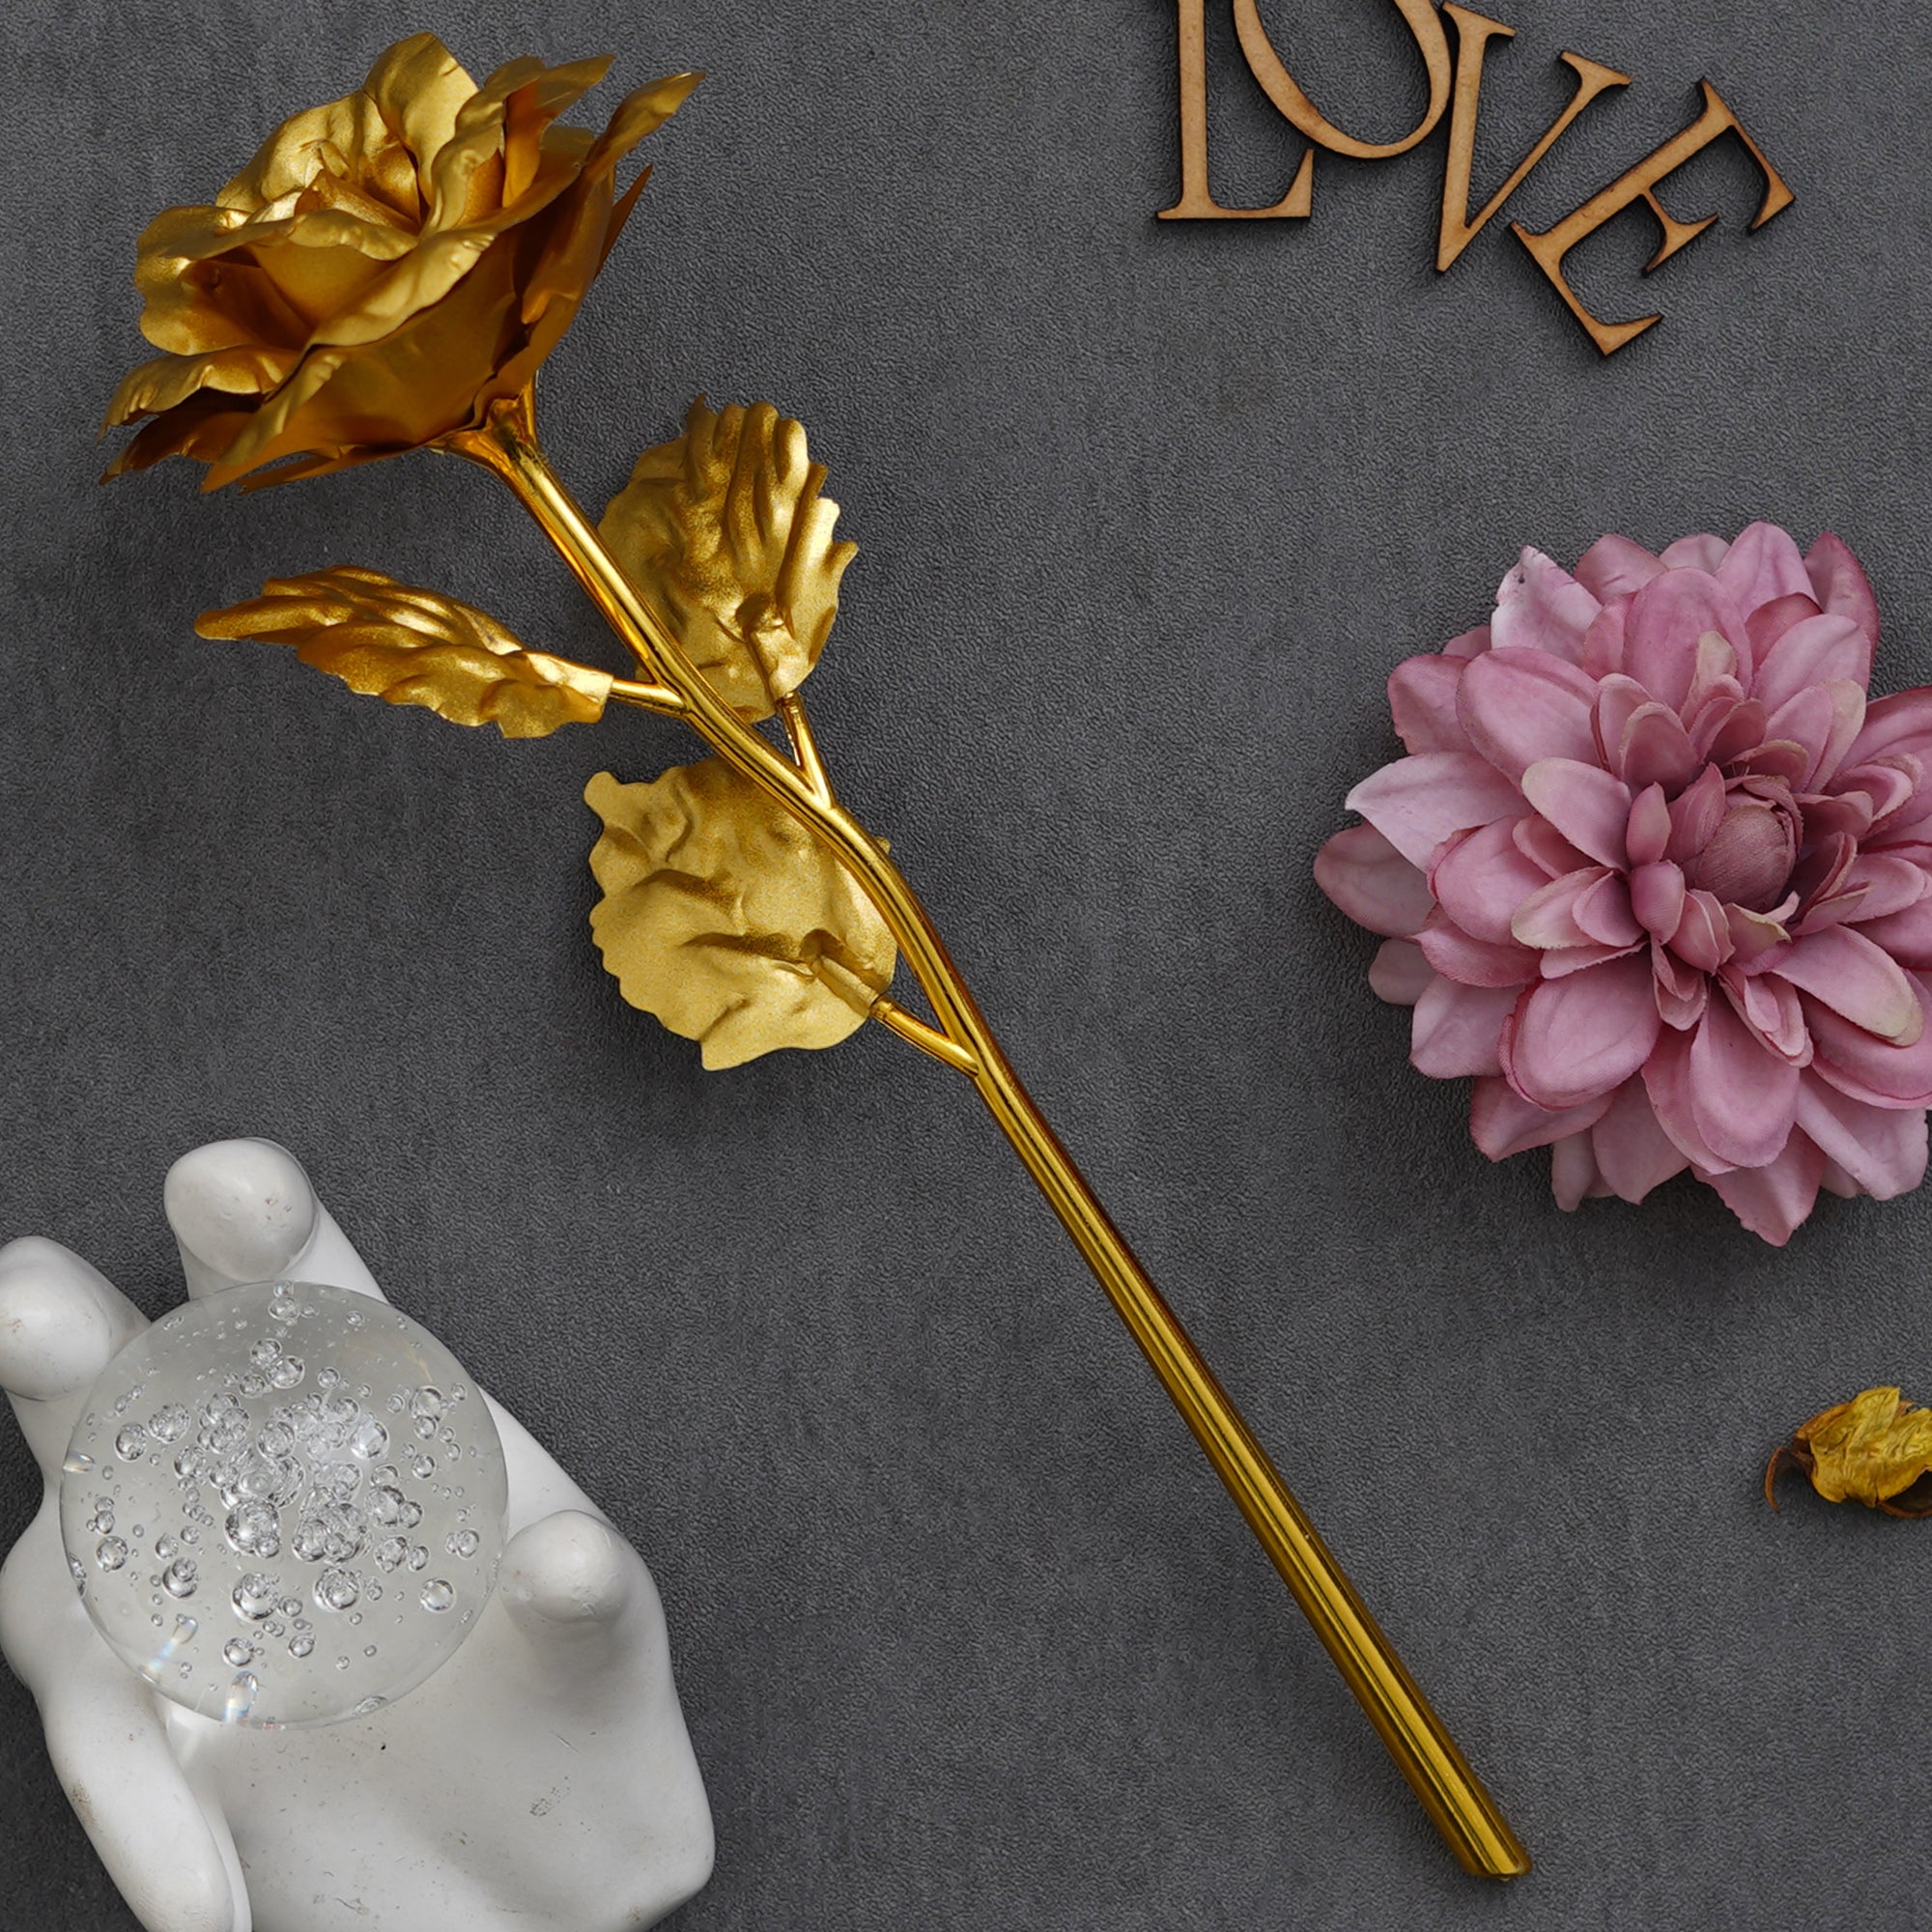 Valentine Combo of Golden Rose Gift Set, "My Heart Beats Only For You" Wooden Showpiece With Stand, Bride Kissing Groom Romantic Polyresin Decorative Showpiece 1